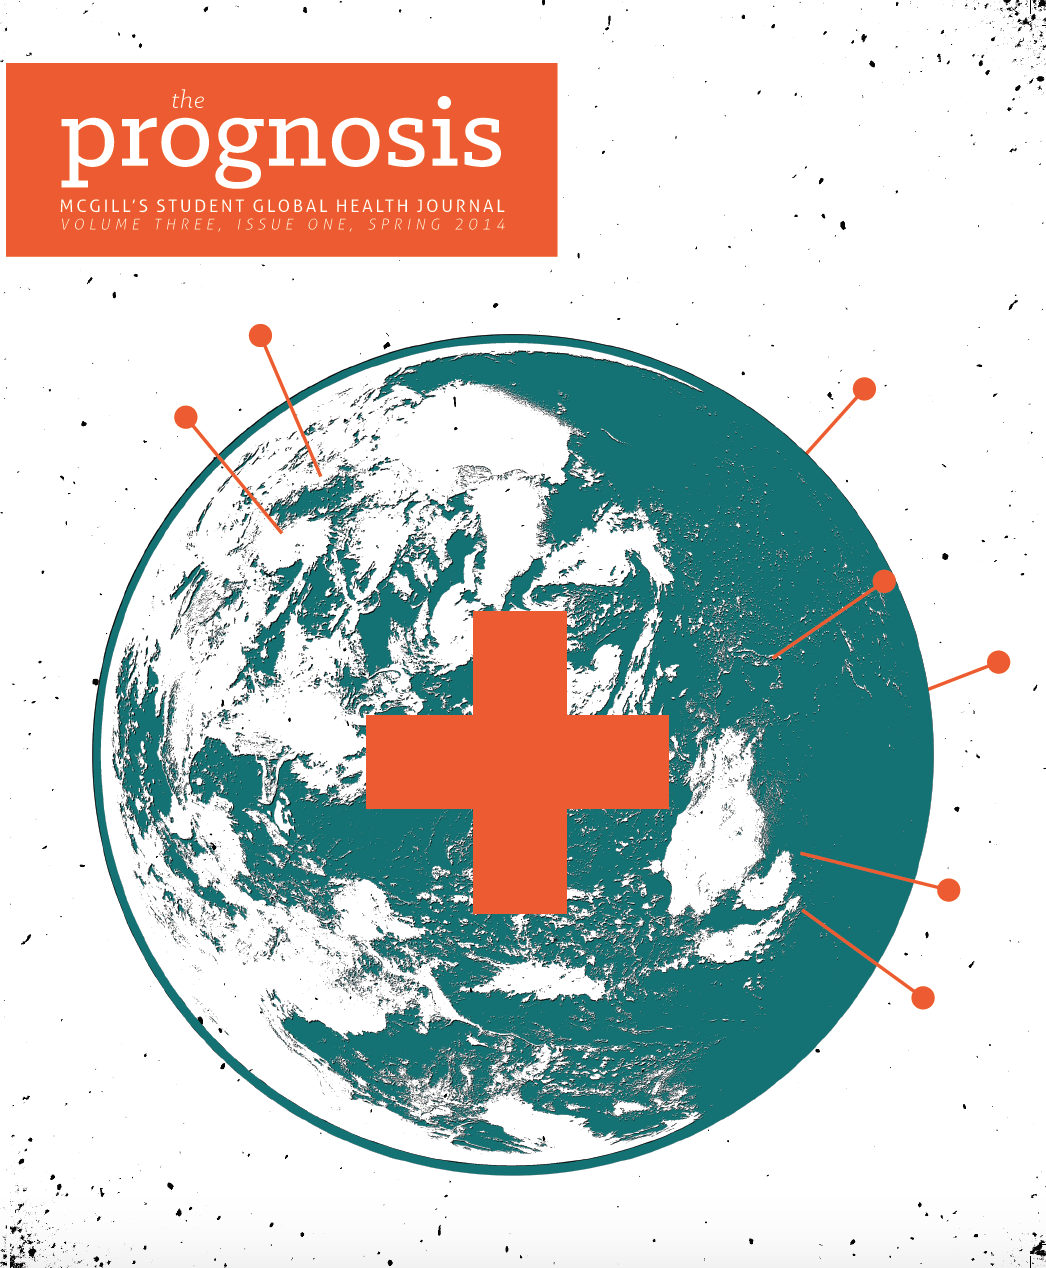 The Prognosis volume 3 cover image: a drawing of Earth with an orange medical cross and randomly place acupuncture needles